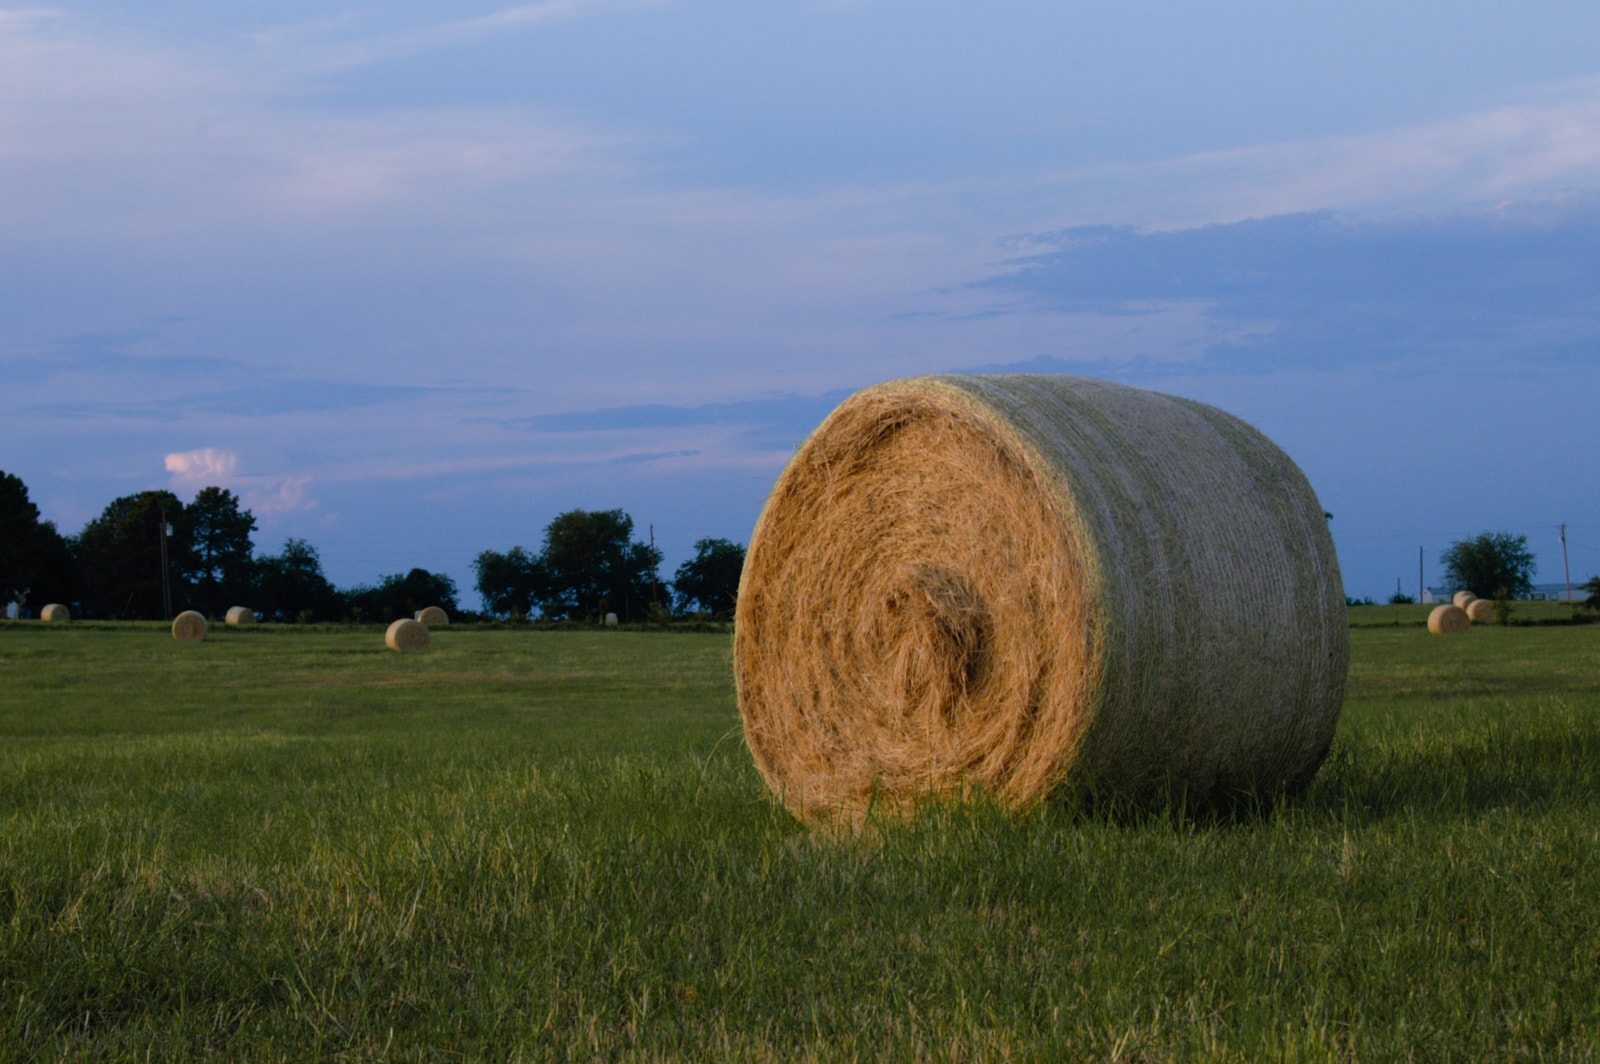 Hay bale in a pasture at dusk